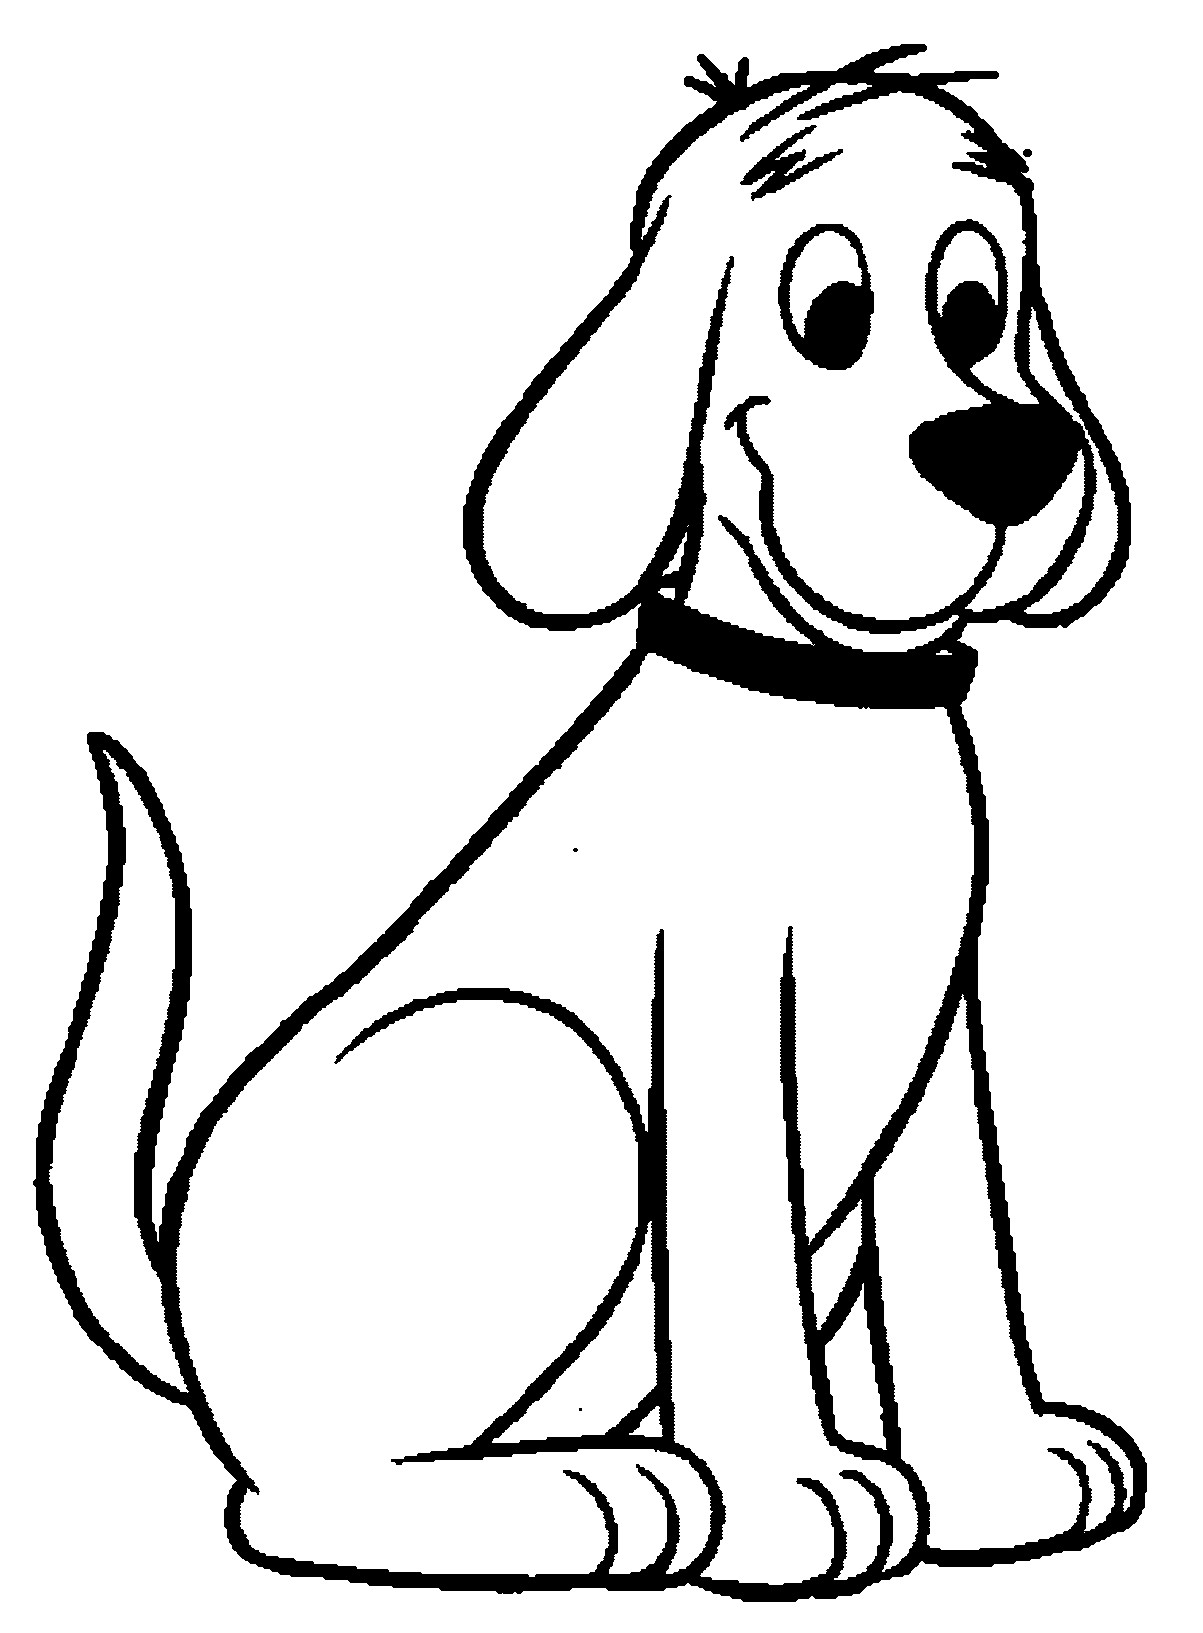 Clifford Coloring Pages
 Clifford the Big Red Dog Coloring Pages